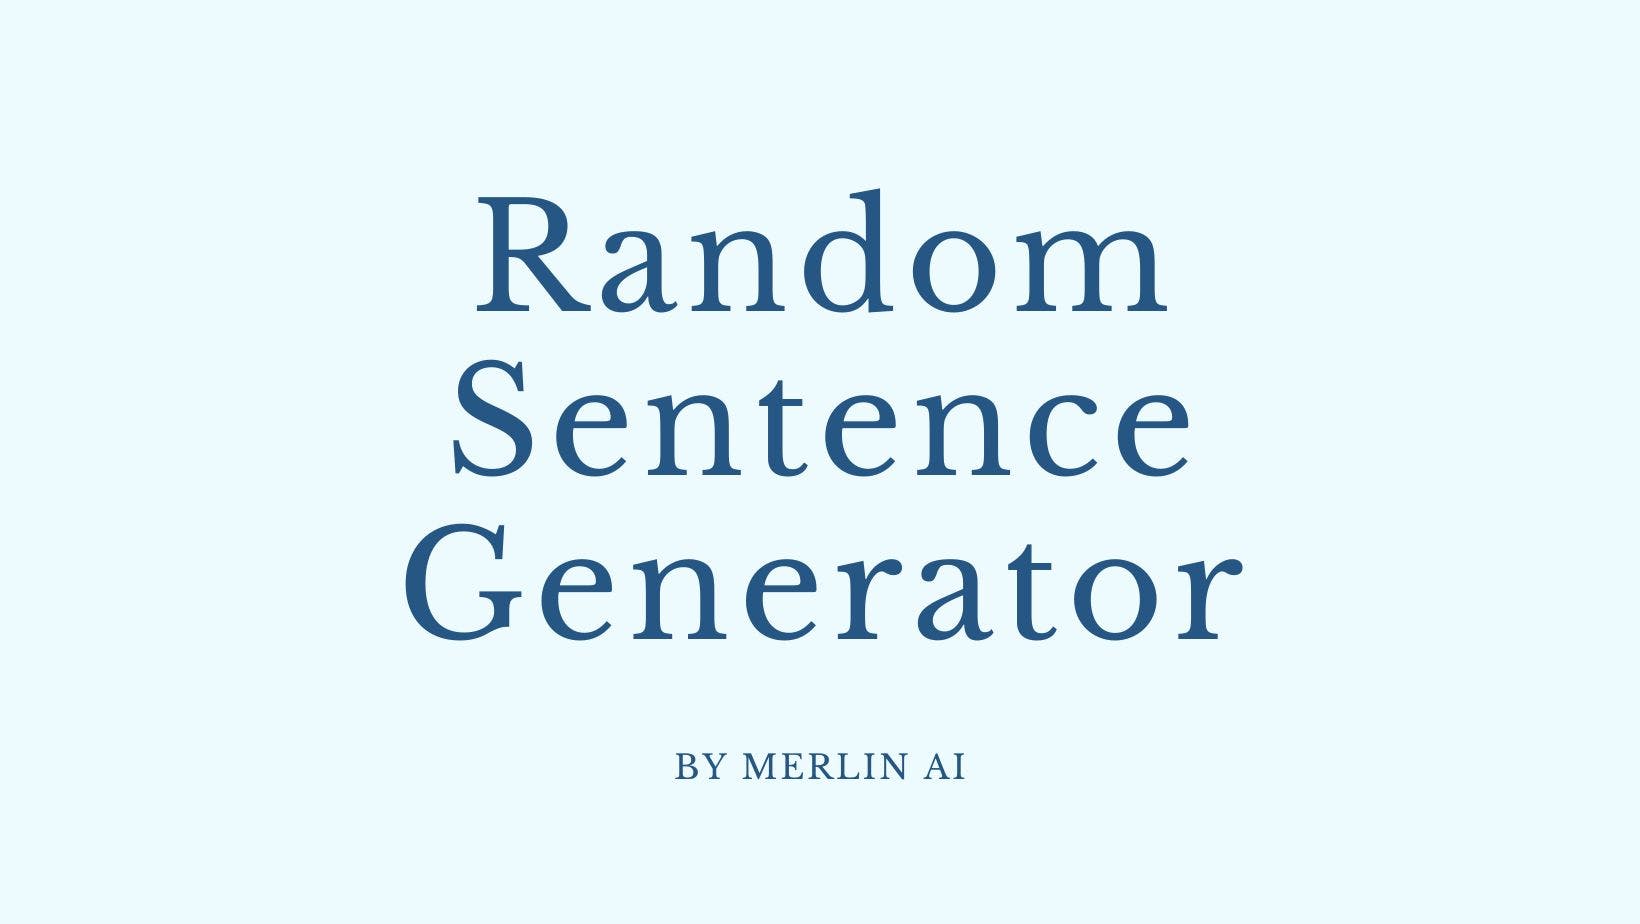 Cover Image for Free Random Sentence Generator by Merlin AI